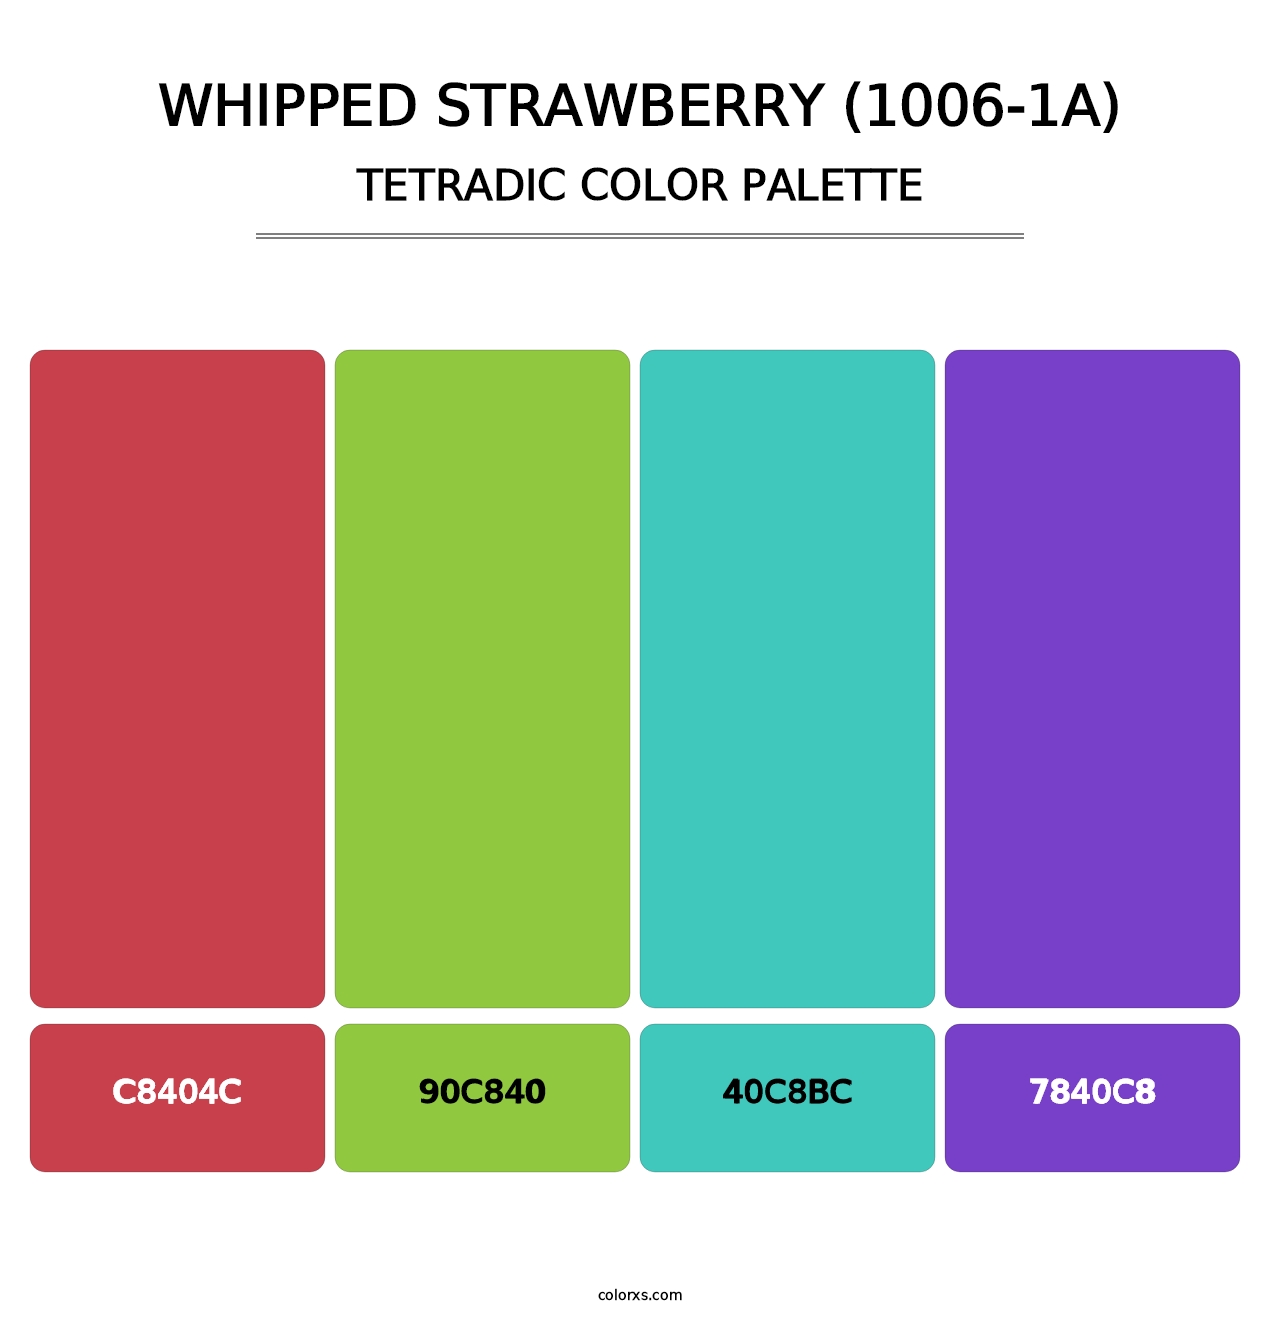 Whipped Strawberry (1006-1A) - Tetradic Color Palette